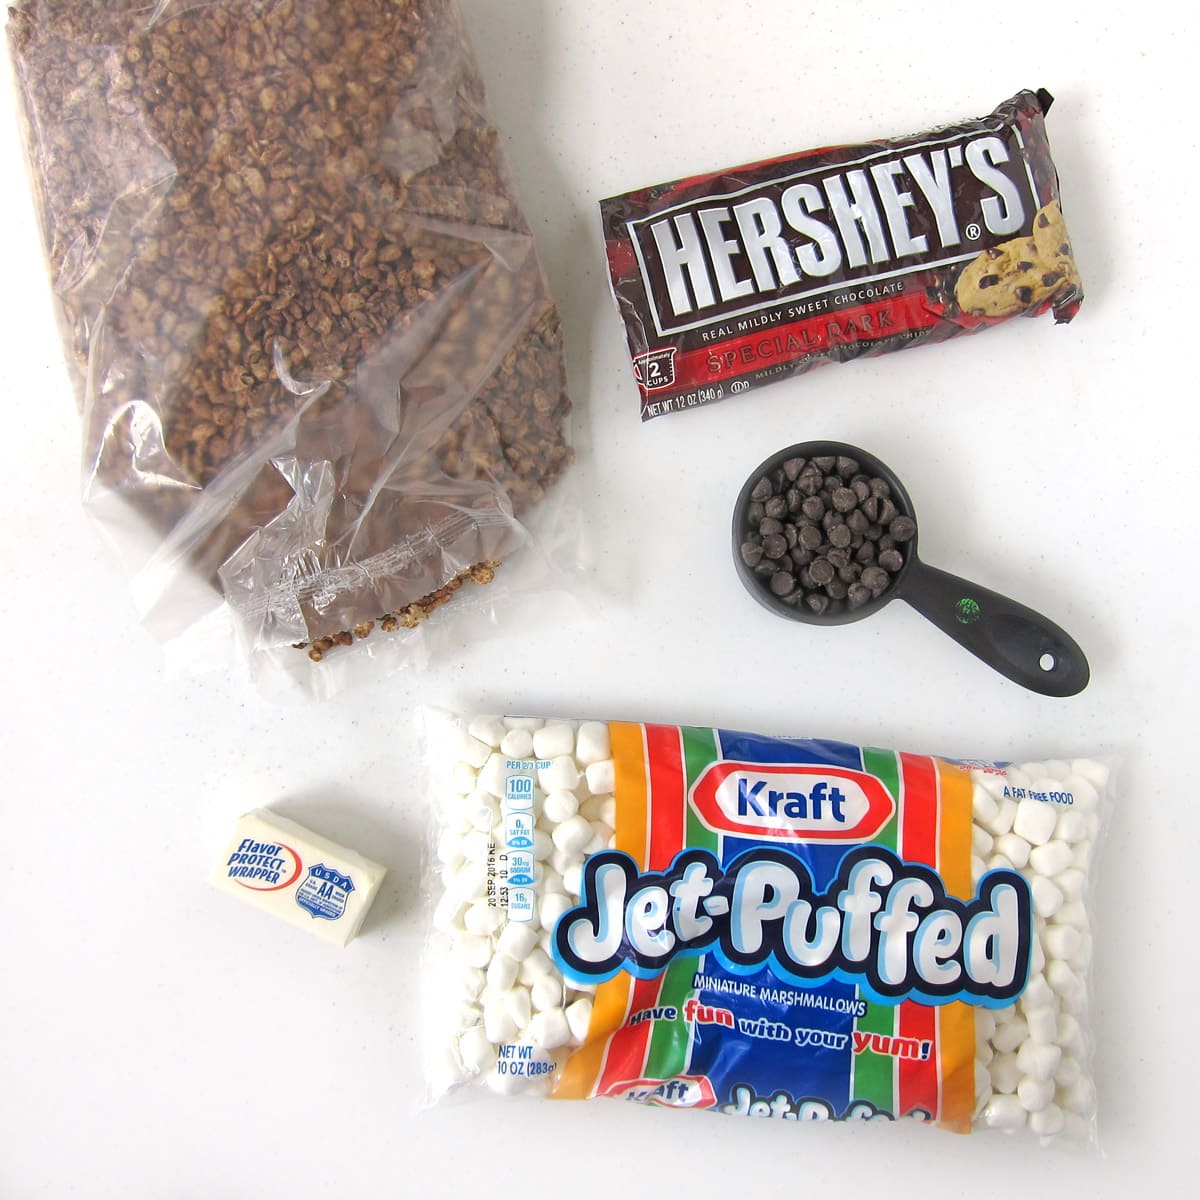 Cocoa Krispies treats ingredients including Cocoa Crispies, Hershey's chocolate chips, butter, and Kraft Jet-Puffed Marshmallows.